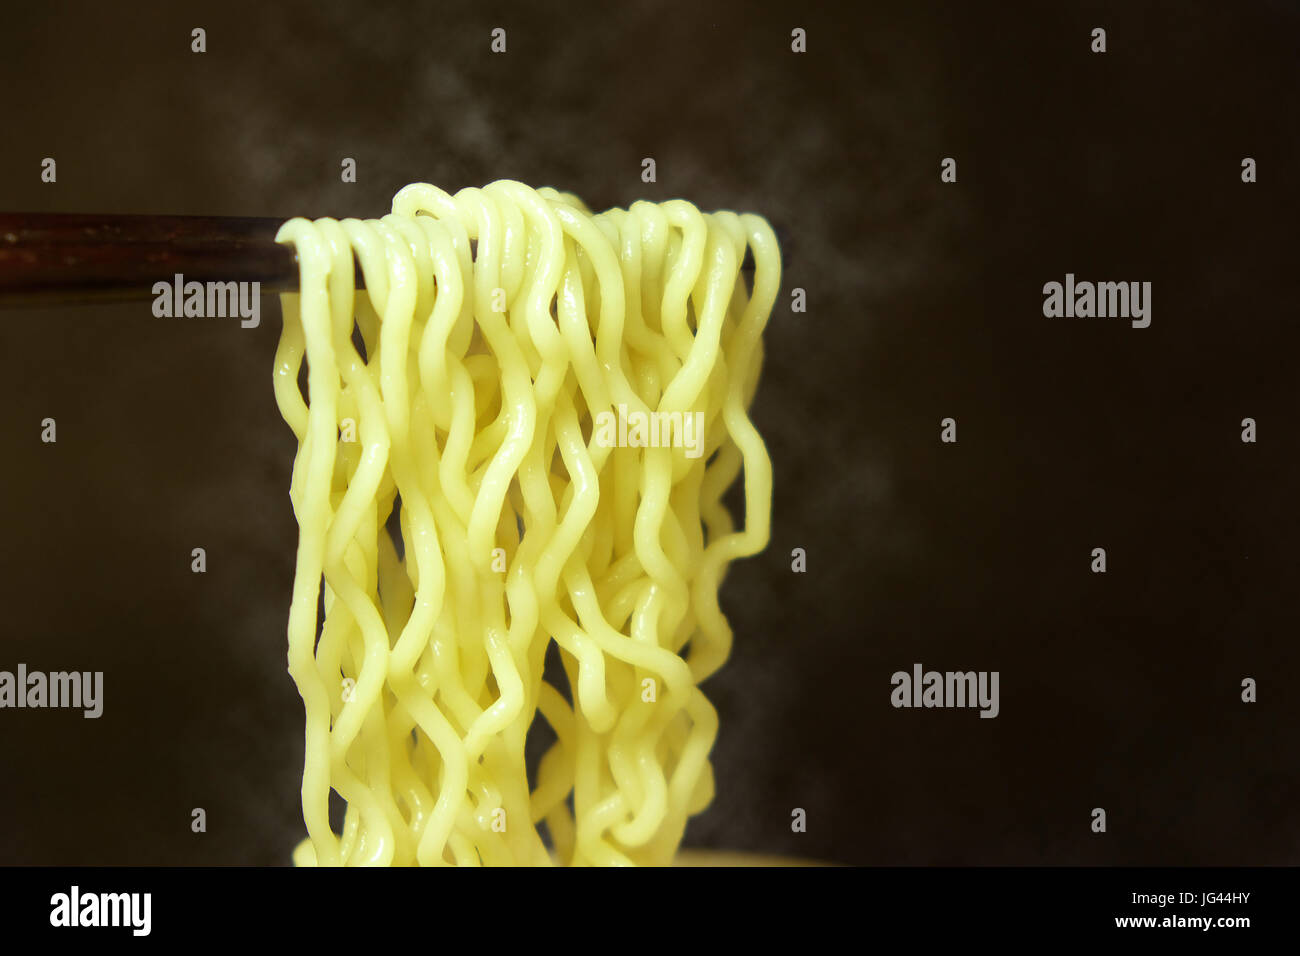 Hot Instant noodle with chopstick, tasty fastfood ready to eat. Stock Photo